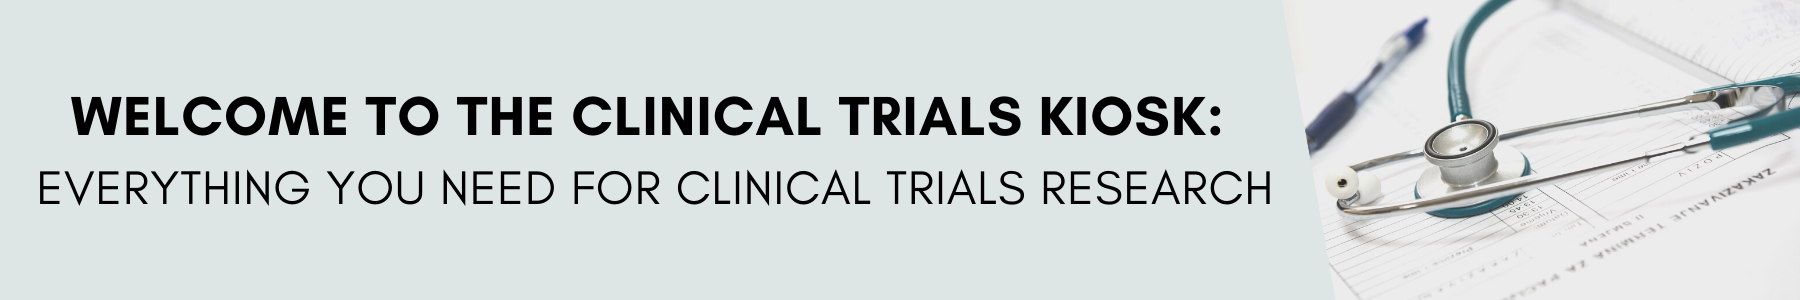 Welcome to the Clinical Trials Kiosk